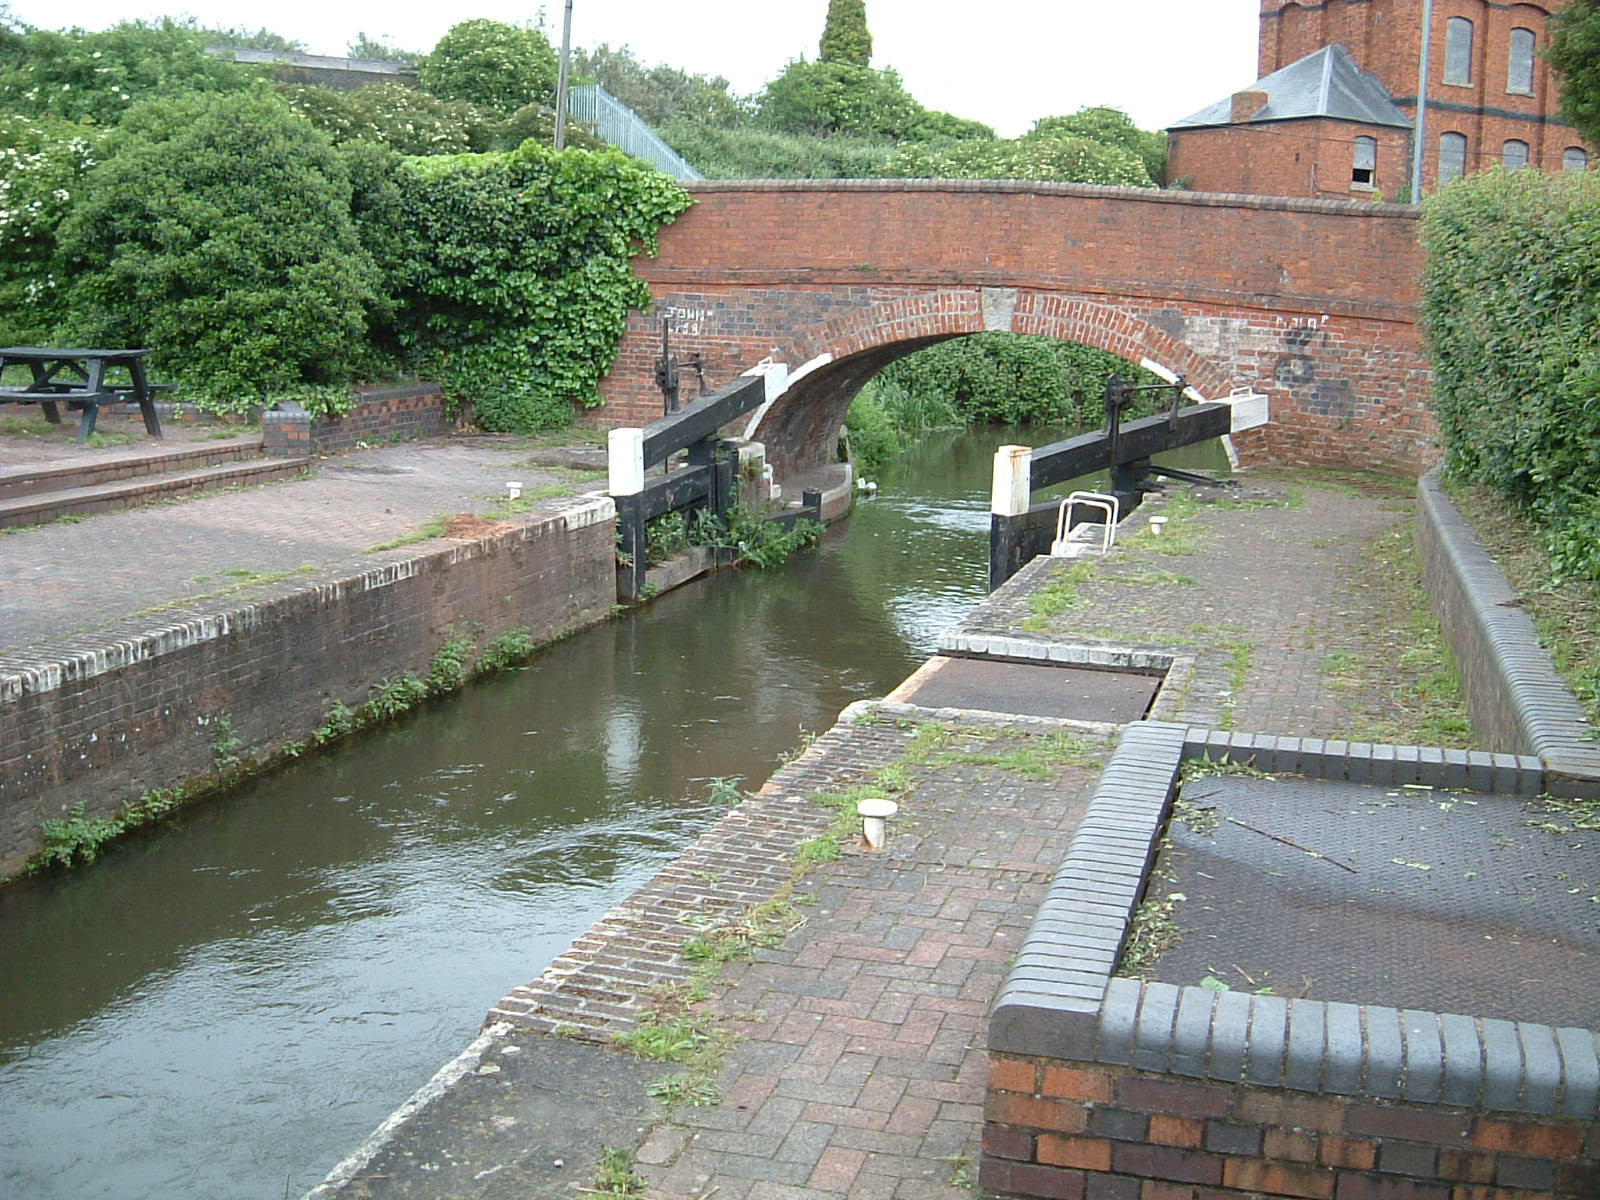 The start of the Bridgwater and Taunton Canal in Taunton